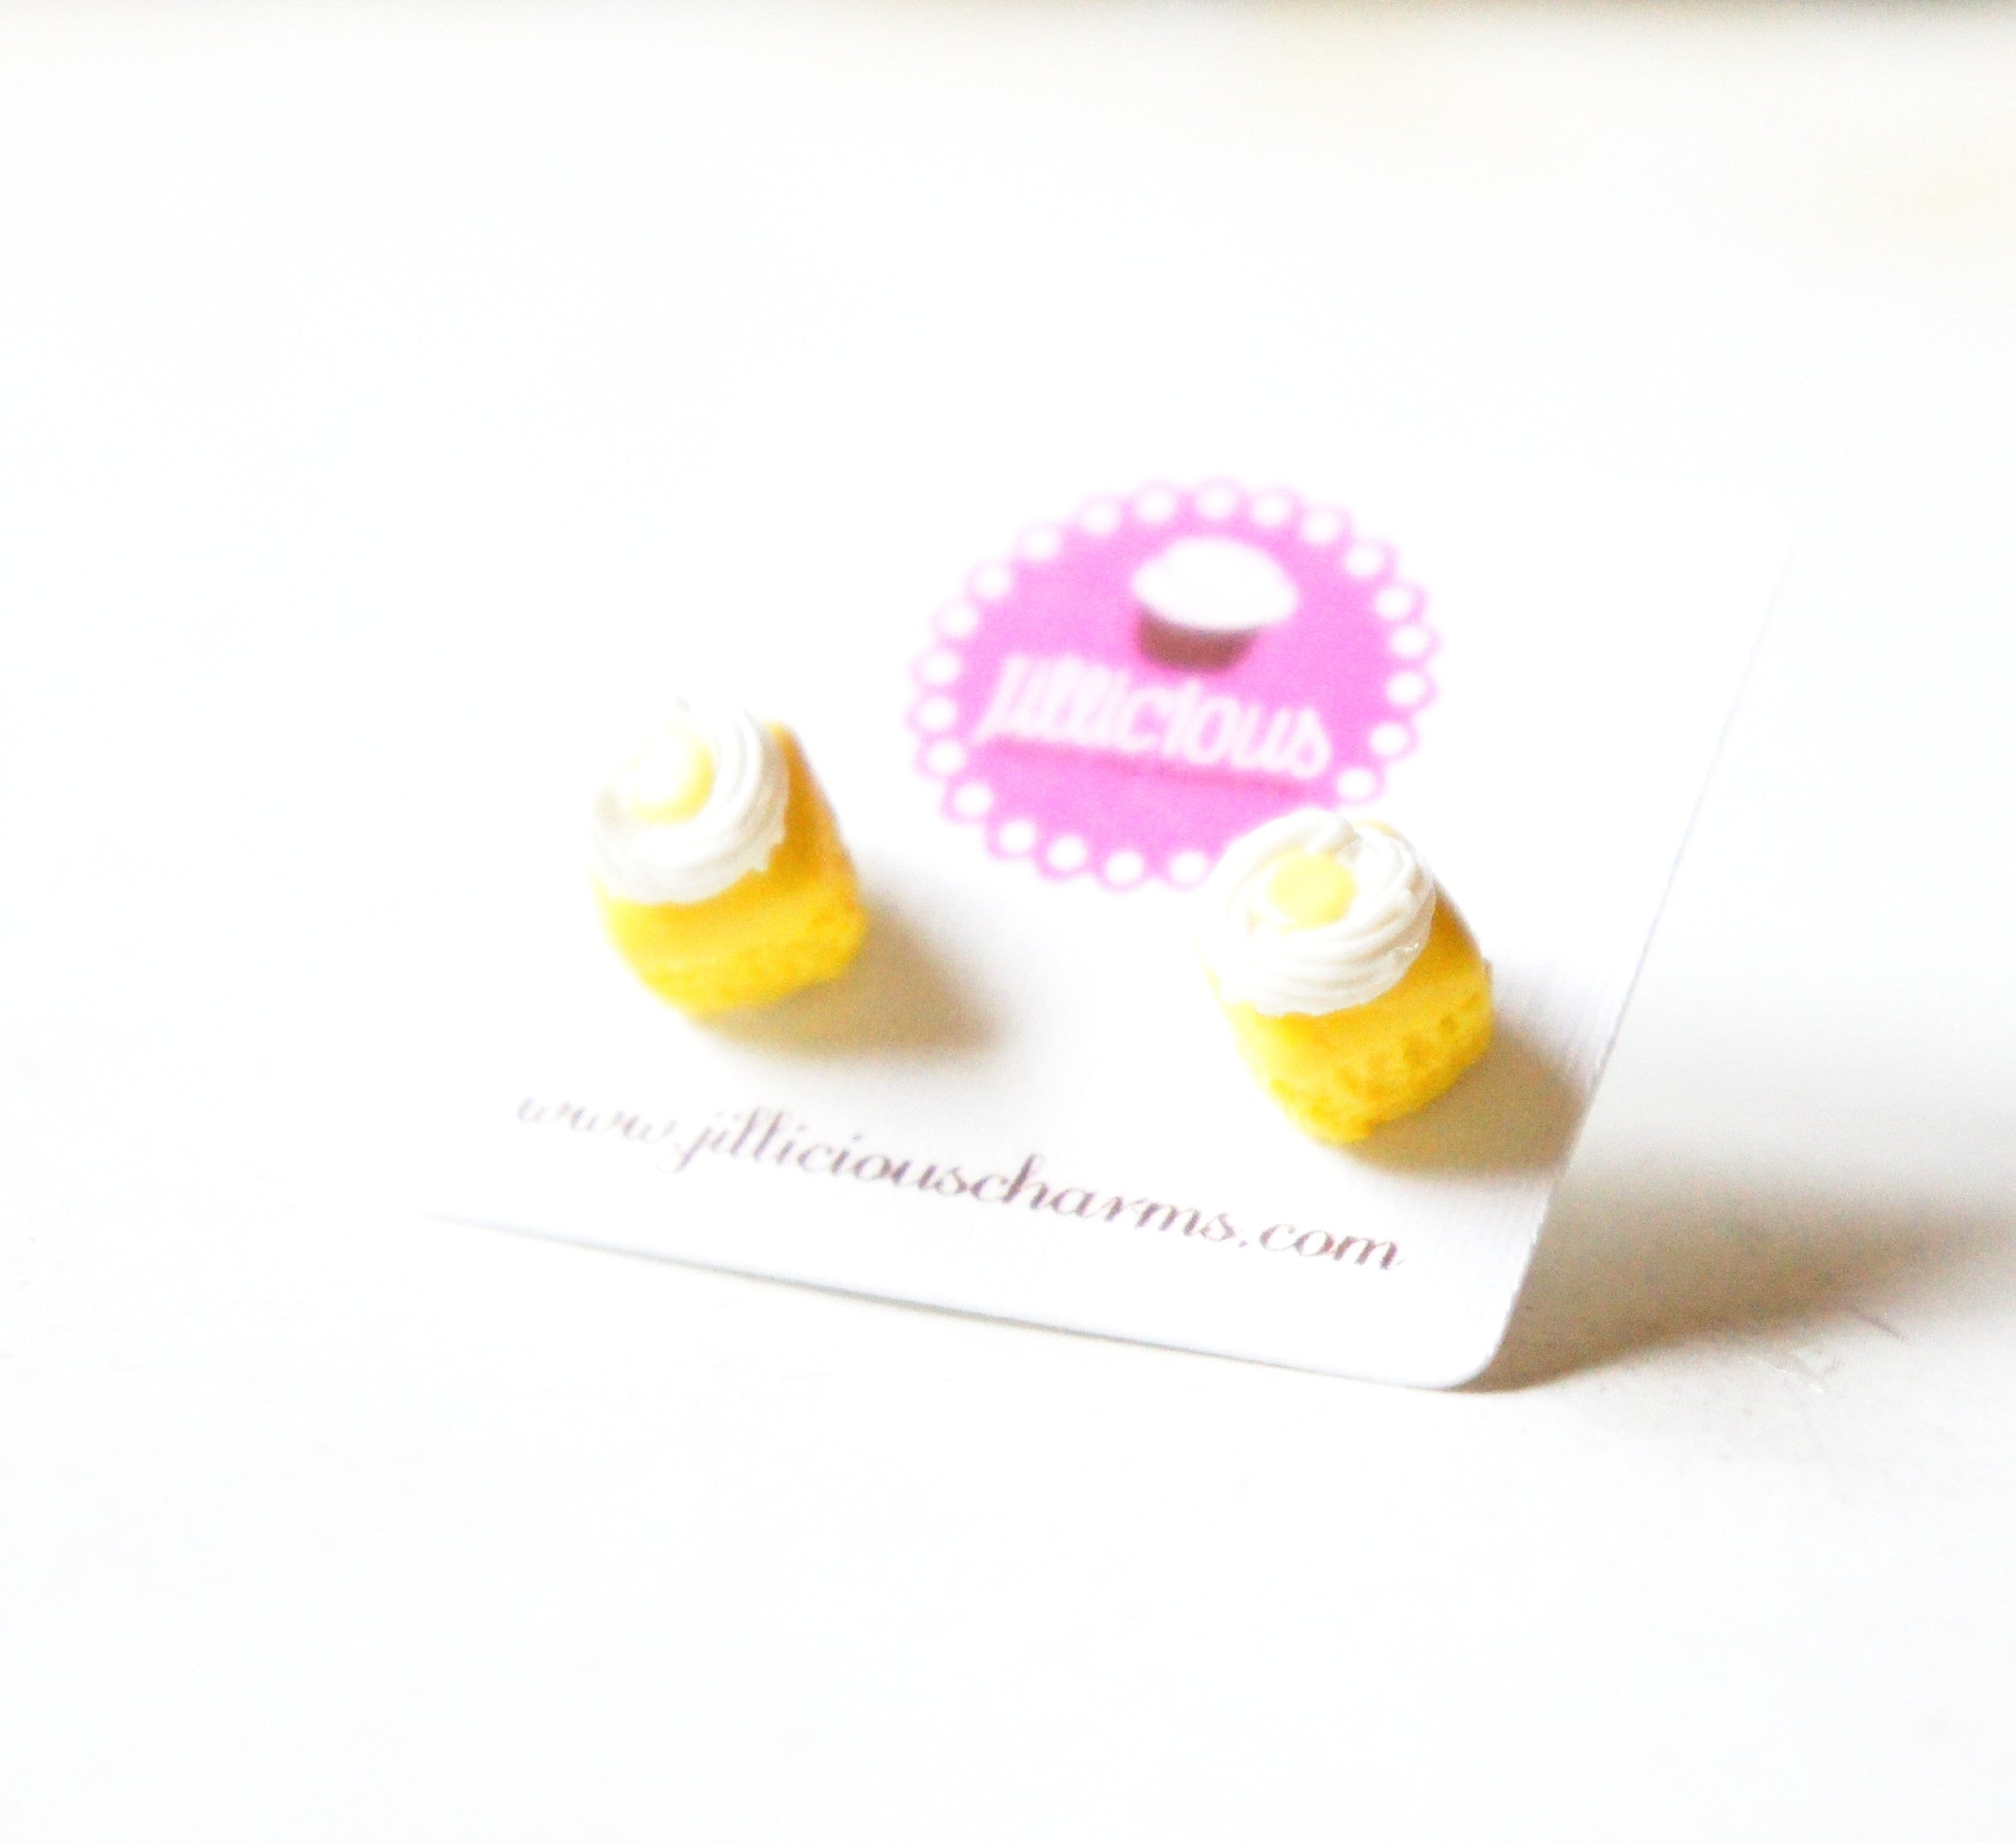 Petit Fours Stud Earrings - Jillicious charms and accessories